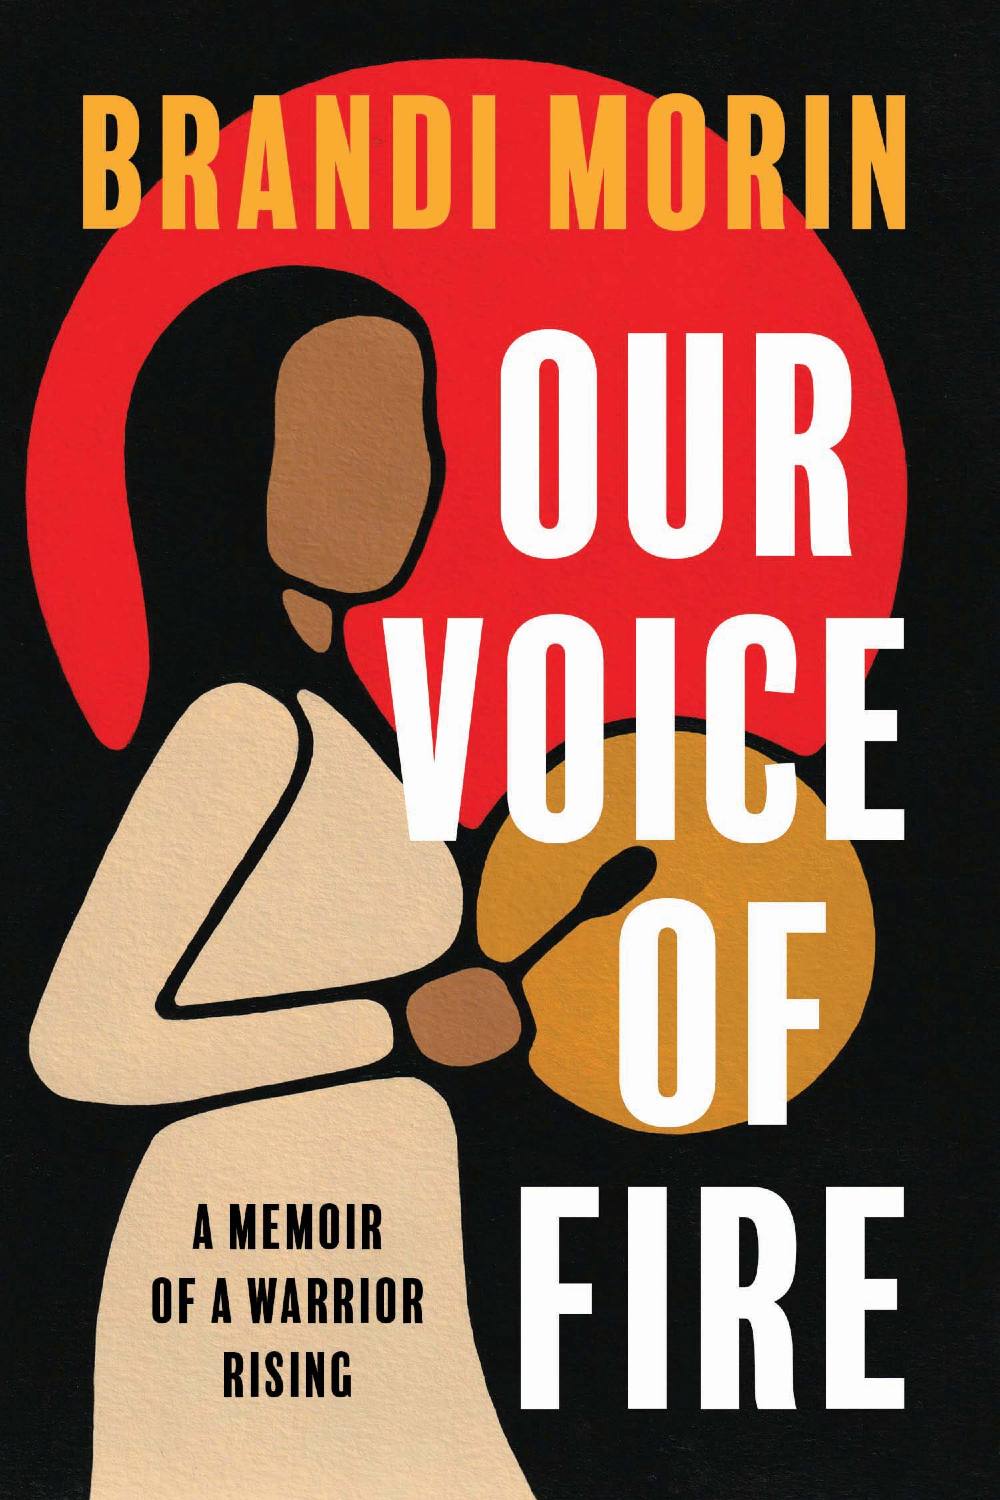 The book cover for 'Our Voice of Fire: A Memoir of a Warrior Rising' by Brandi Morin features the illustrated image of a woman with a drum against a black background. The book title is in all caps white san-serif text.